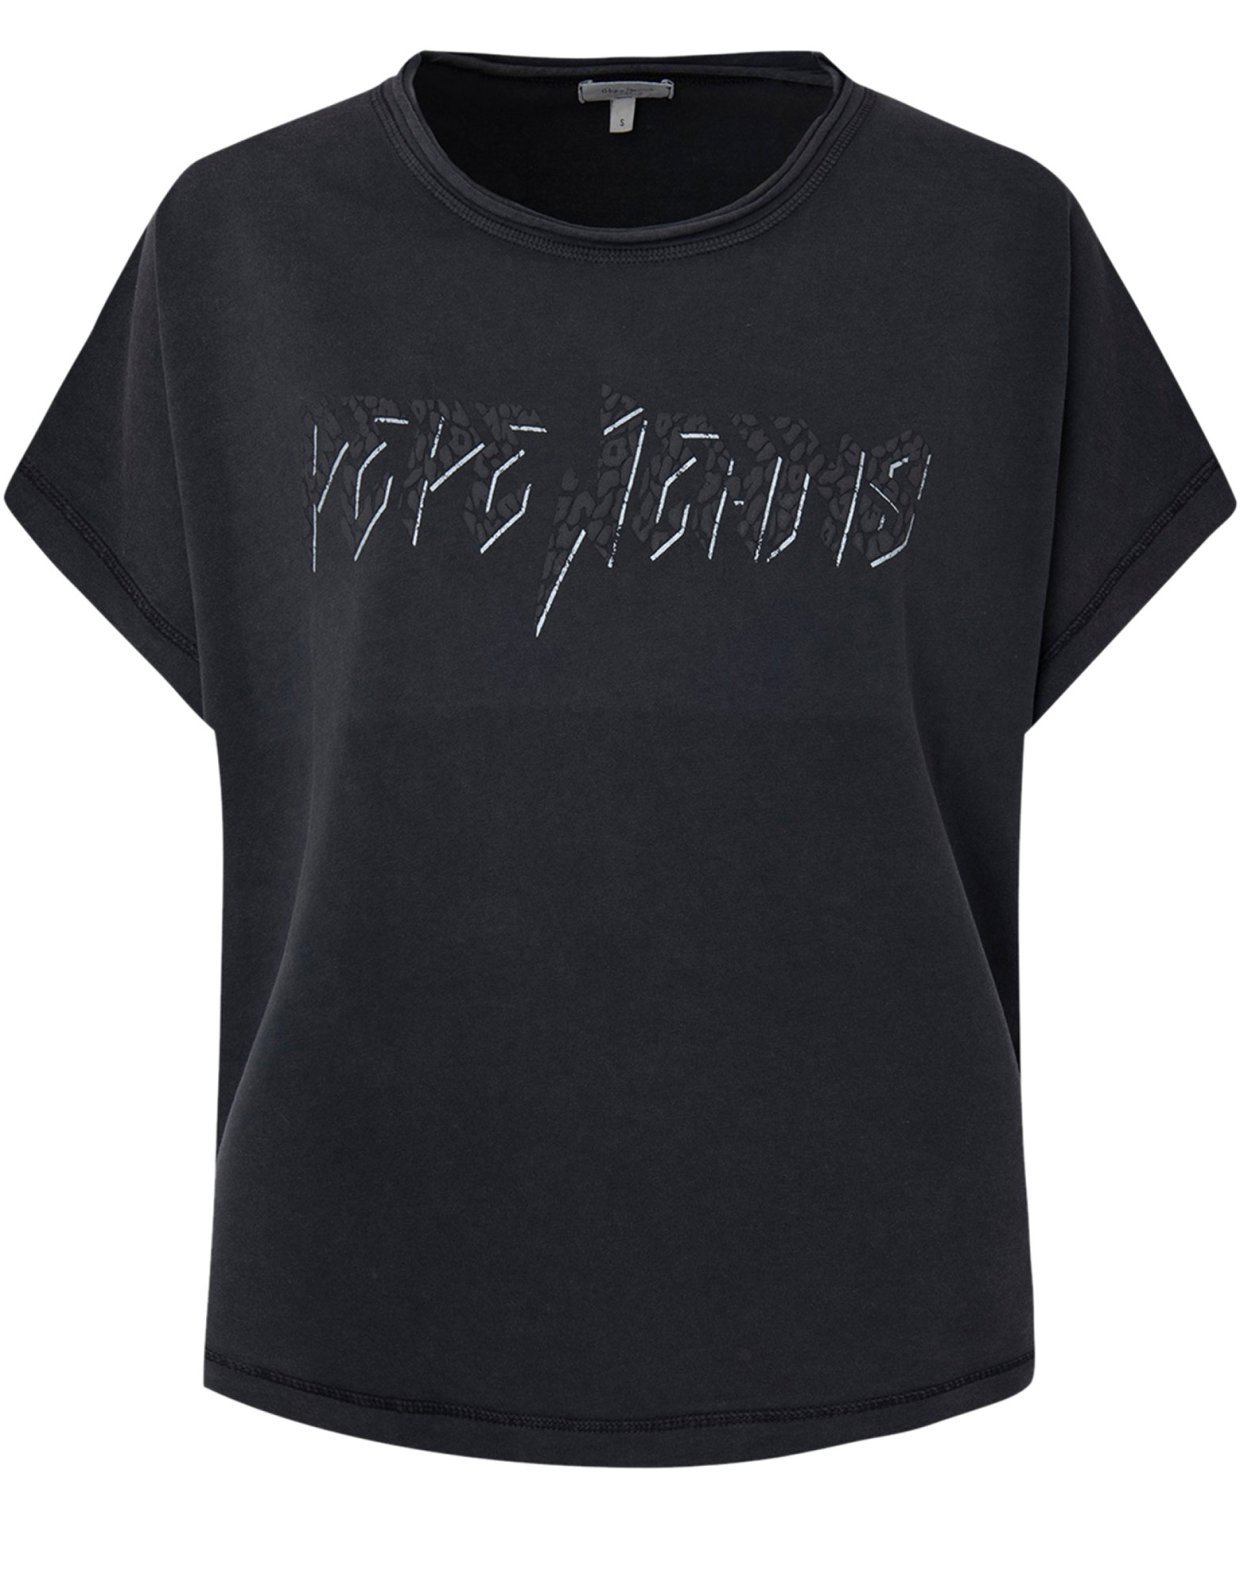 Pepe Jeans Reese t-shirt washed black